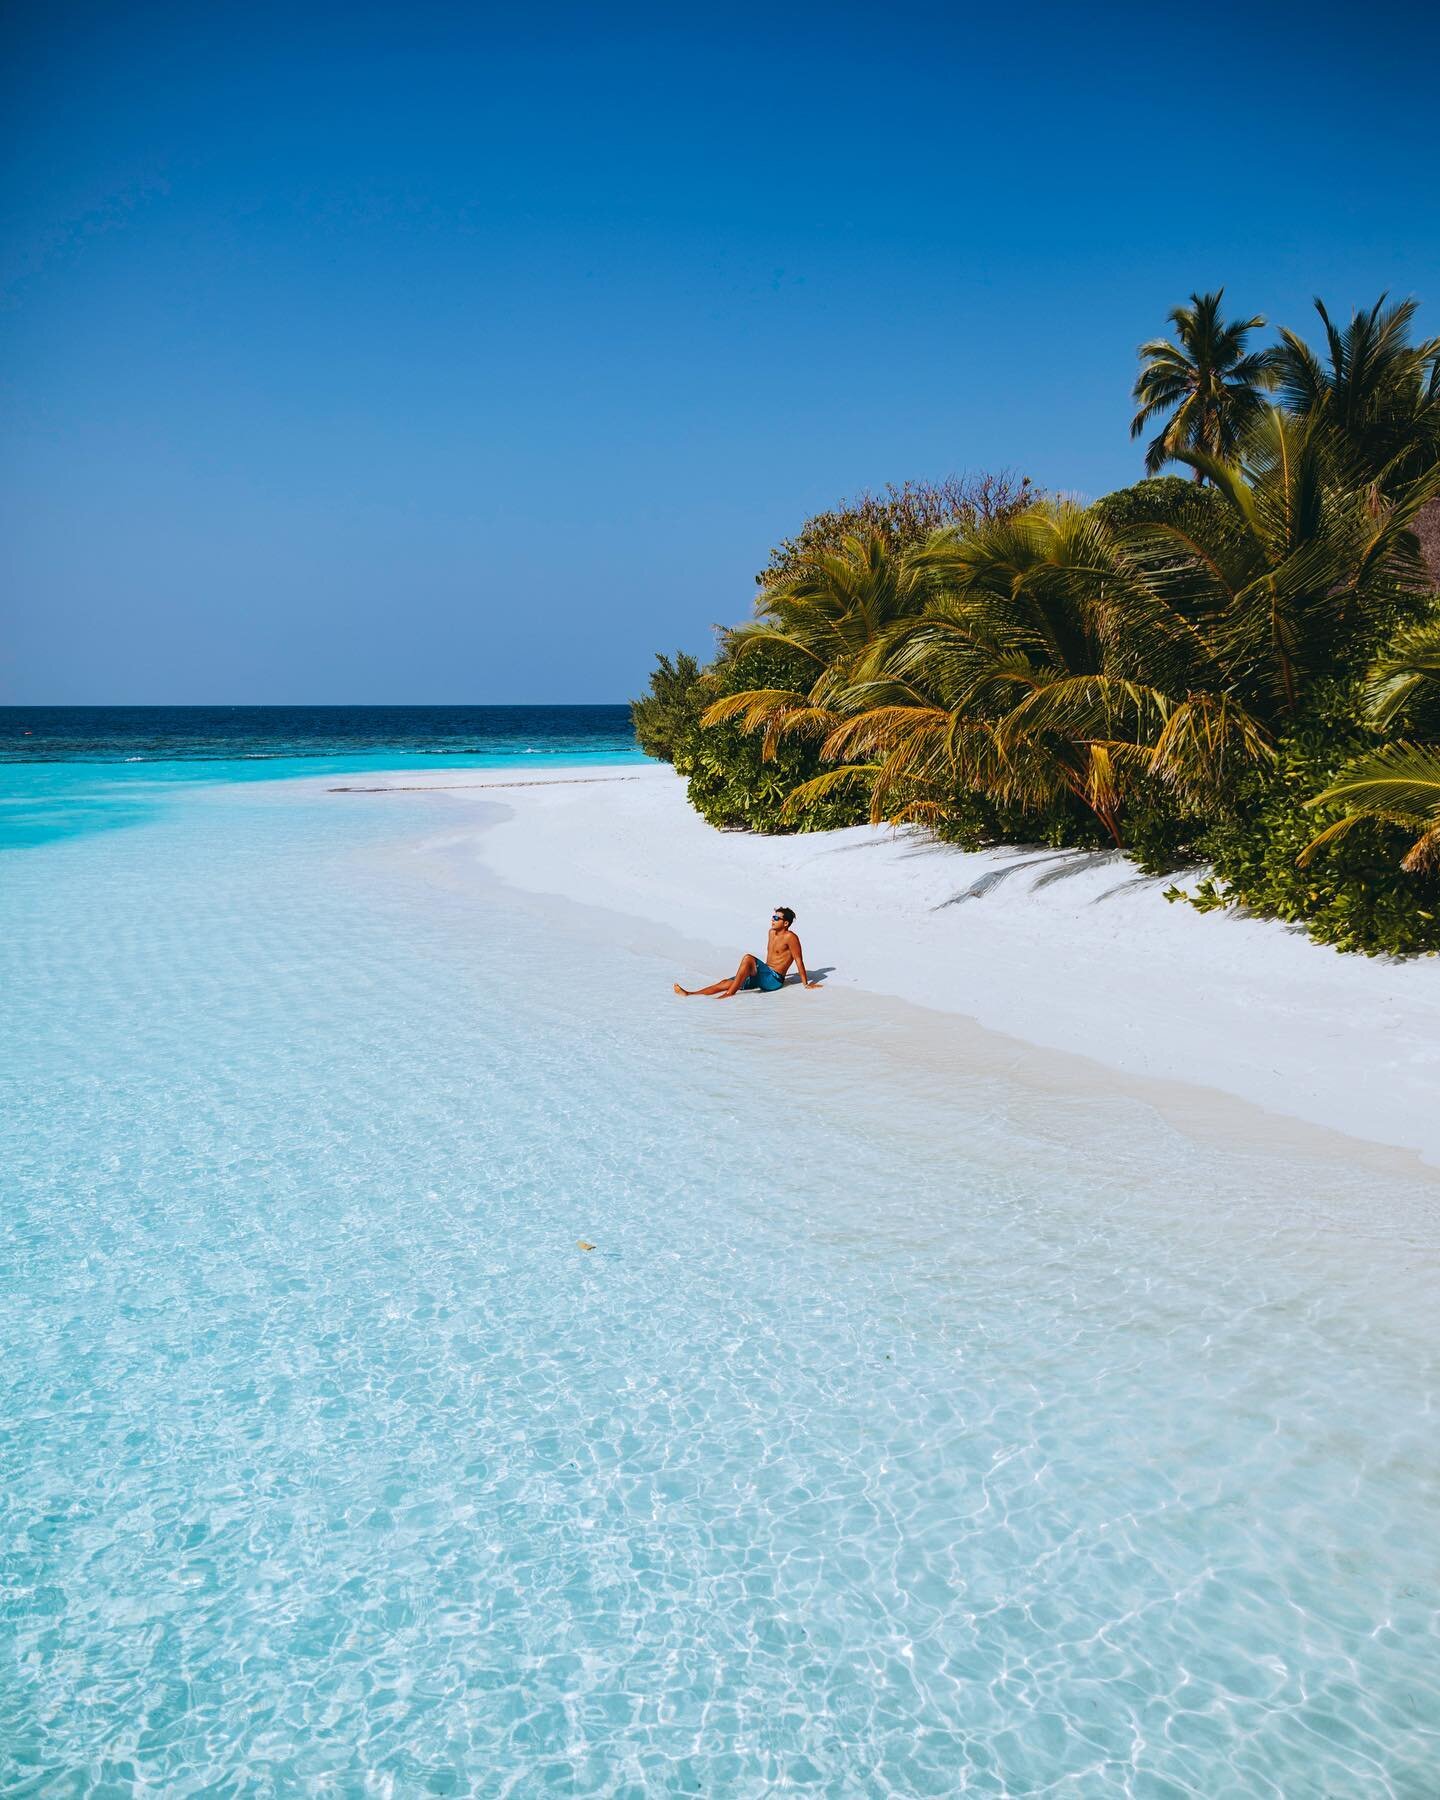 Breathing in the fresh ocean air, feeling the soft sand between my toes, and gazing out at the endless blue horizon. The Maldives is where my soul finds its peace&hellip;🏝️ 

#islandvibes #traveltheworld #maldives #oceanview #beachlife